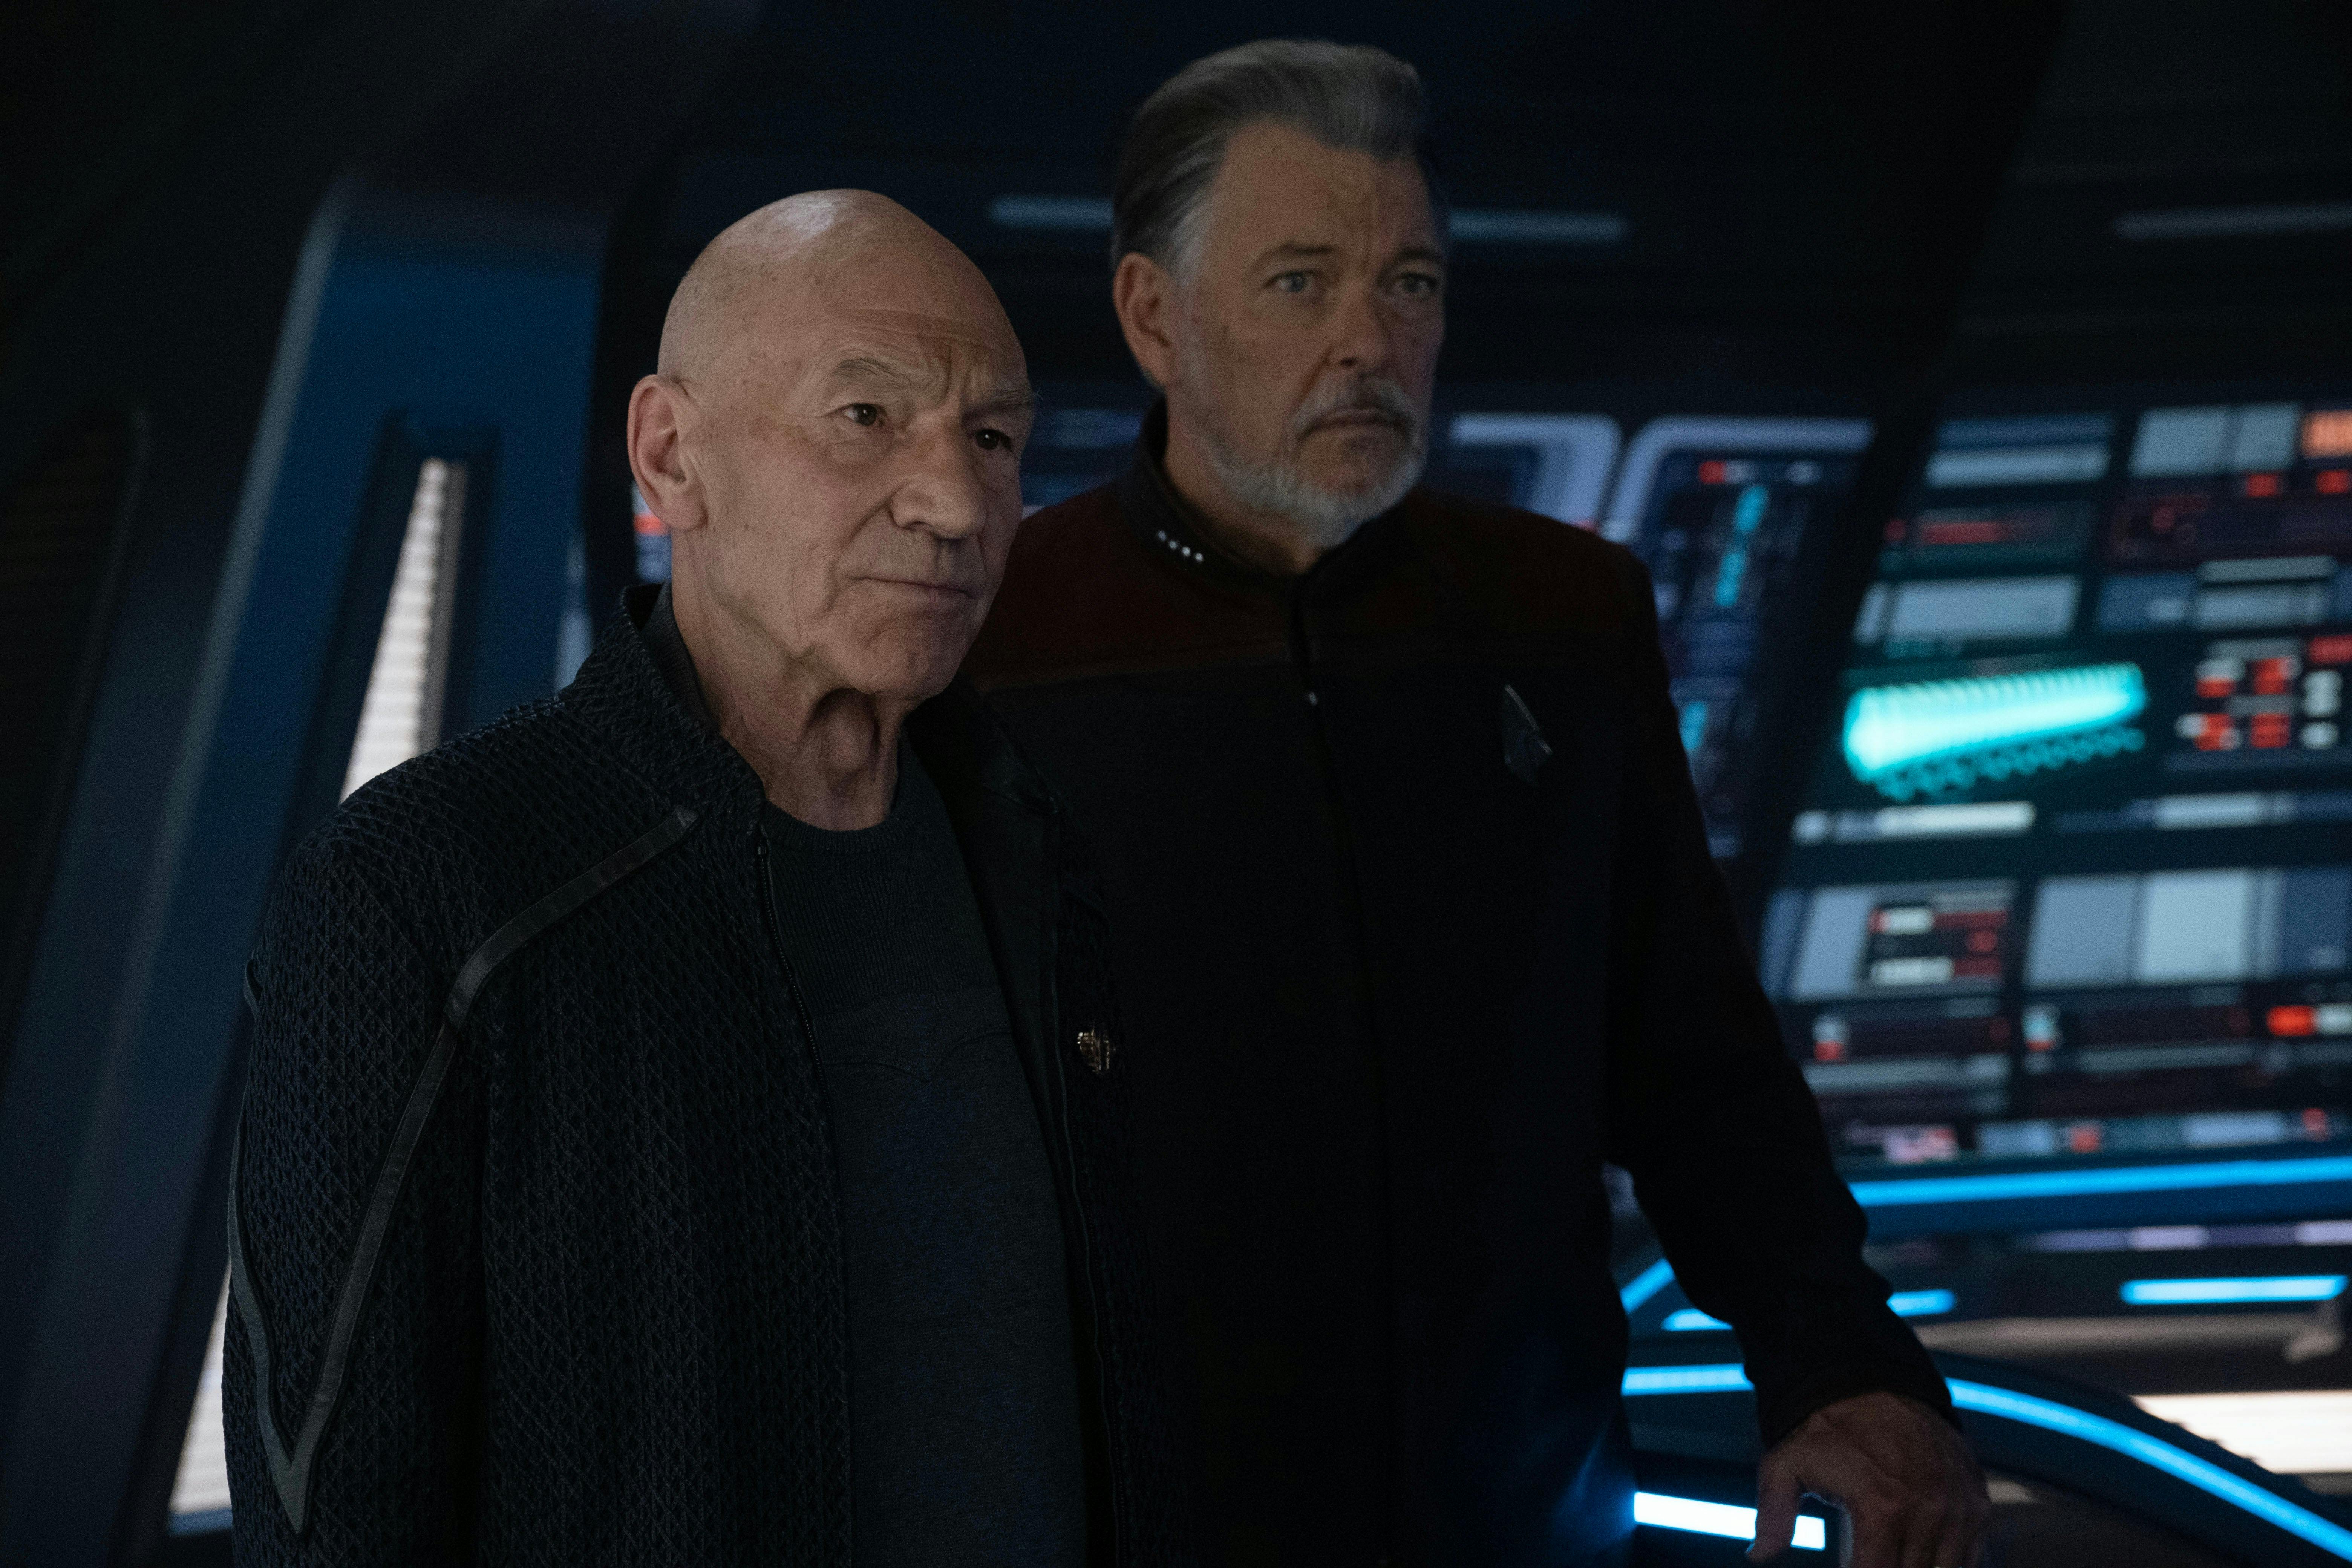 Admiral Picard and Captain Riker look ahead while on the bridge of the Titan on Star Trek: Picard